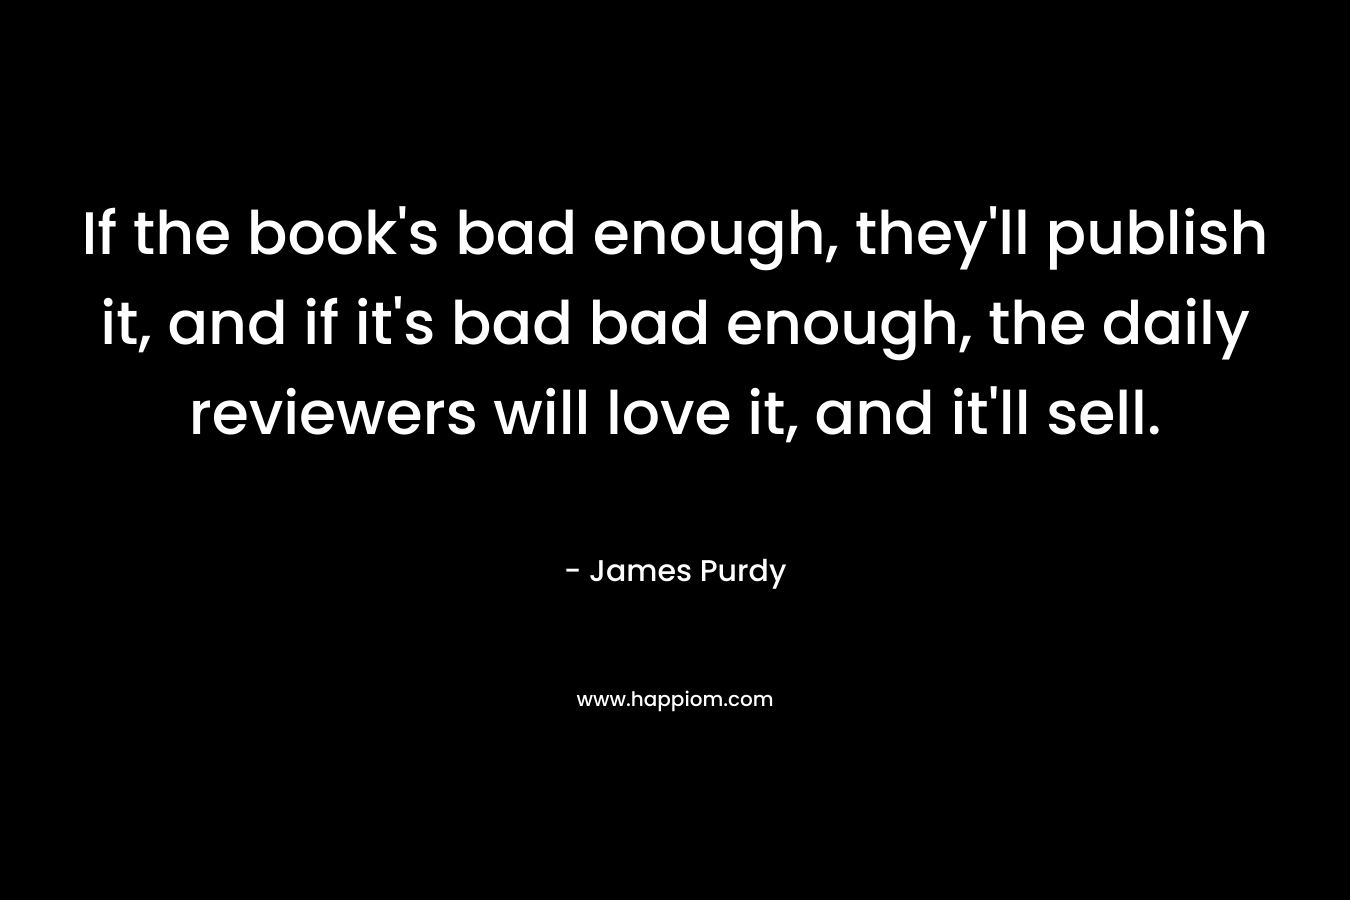 If the book’s bad enough, they’ll publish it, and if it’s bad bad enough, the daily reviewers will love it, and it’ll sell. – James Purdy